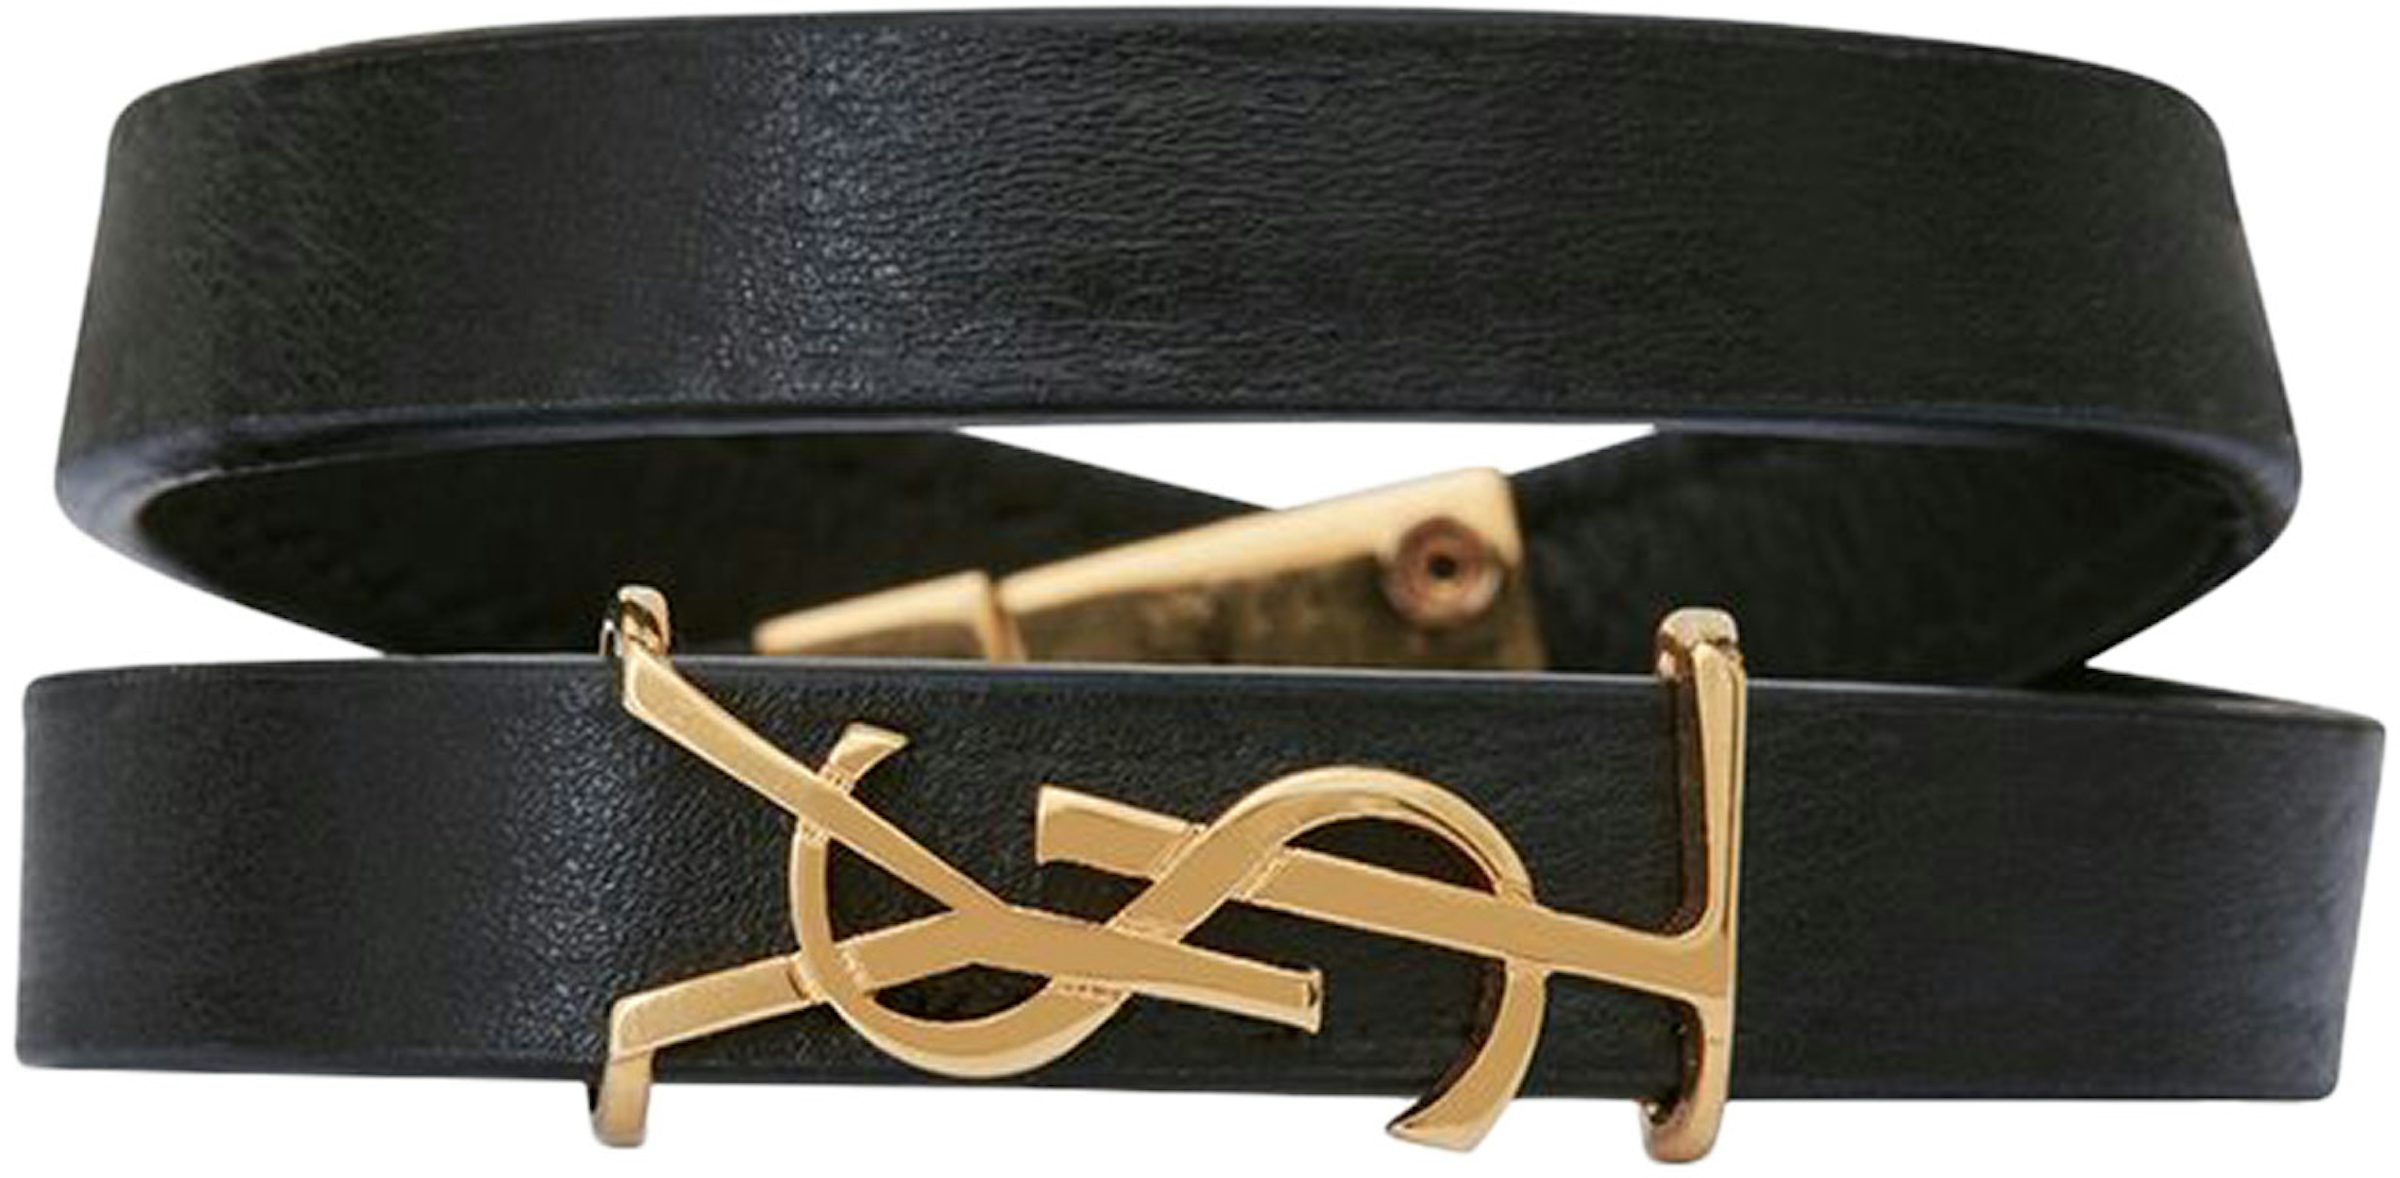 Cassandra belt with square buckle in smooth leather - Saint Laurent